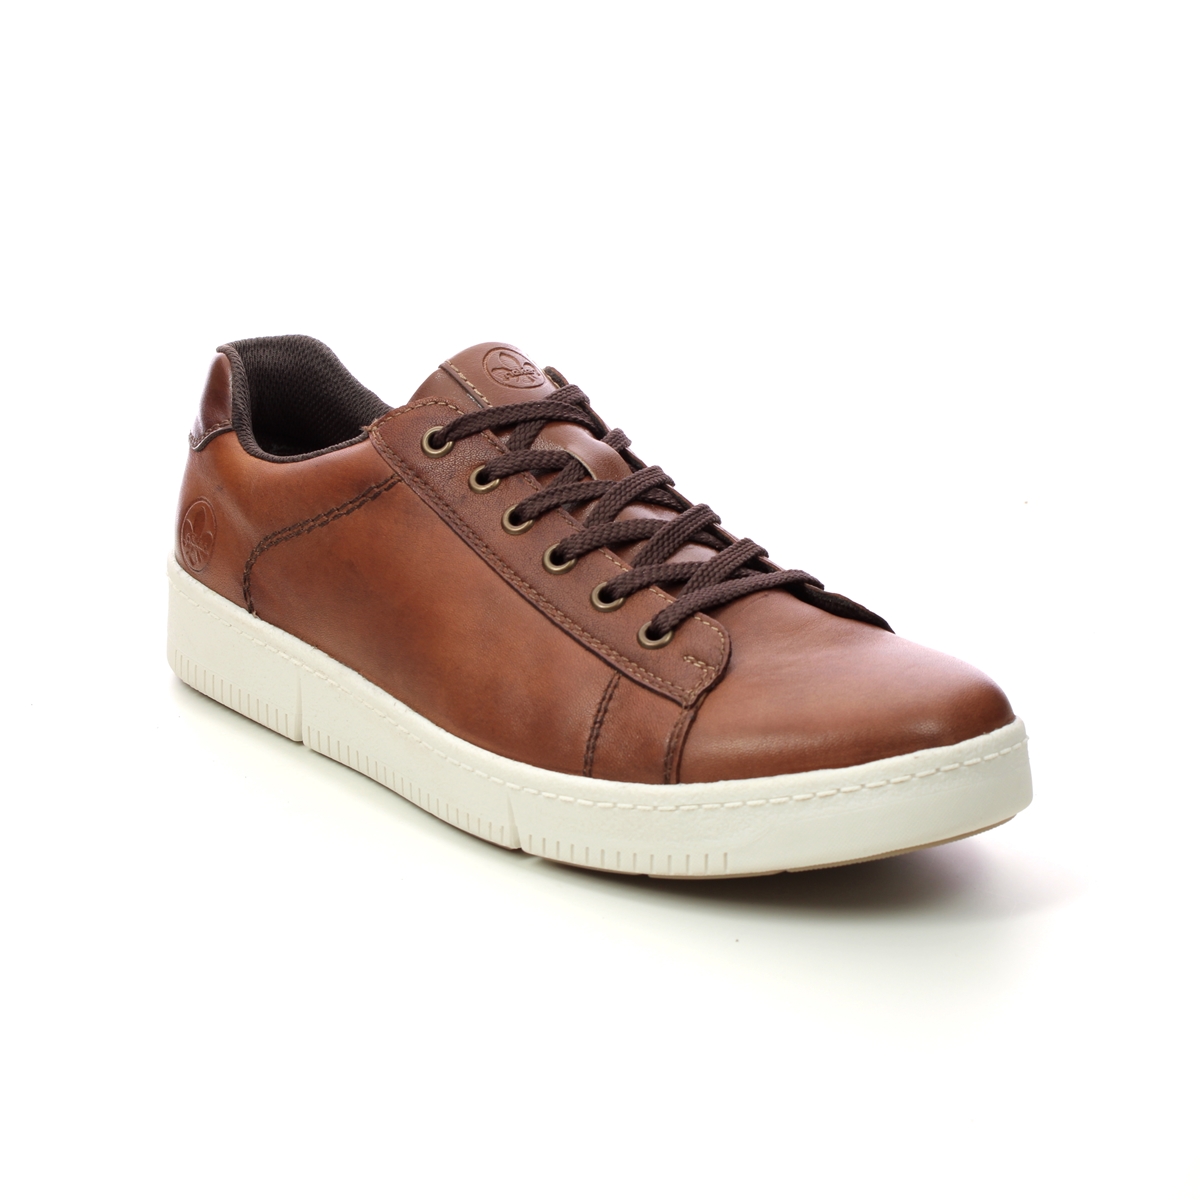 Rieker Seven Soft Tan Leather Mens Trainers B7120-24 In Size 44 In Plain Tan Leather